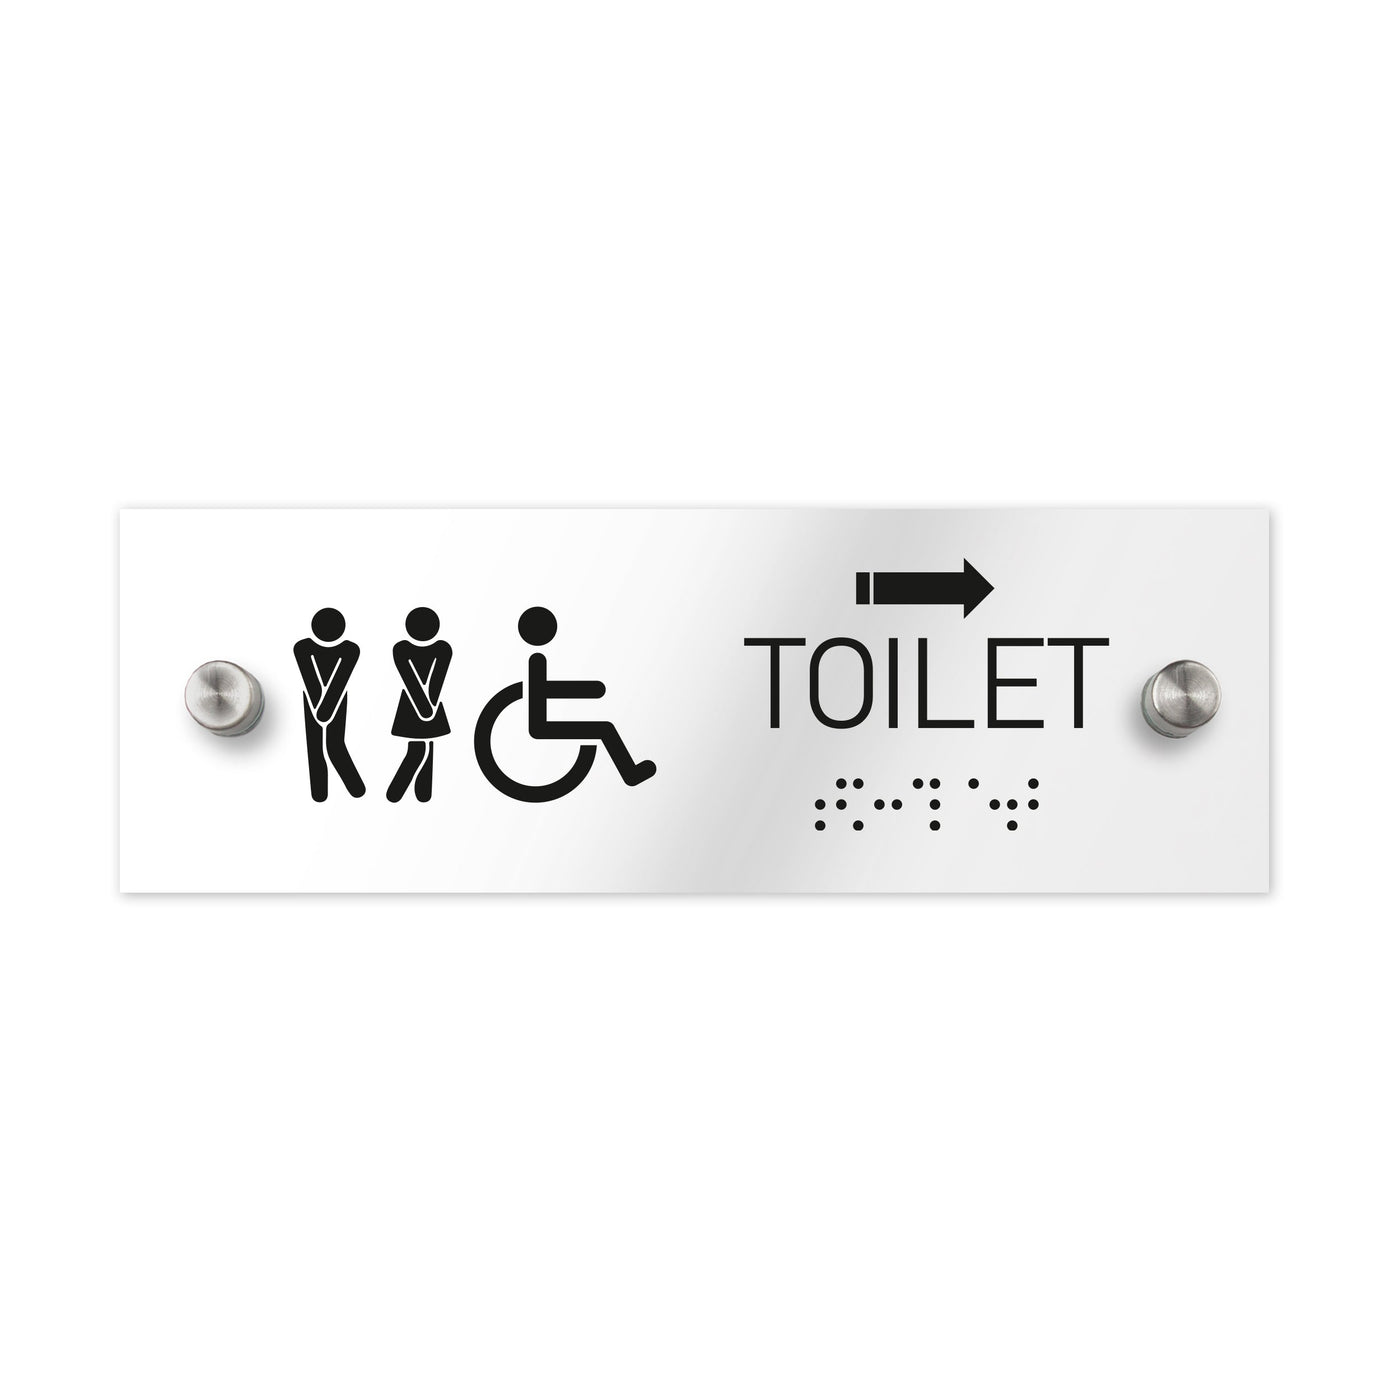 Bathroom Signs - All Gender & Weelchair Toilet ADA Signs With Braille - Clear Acrylic